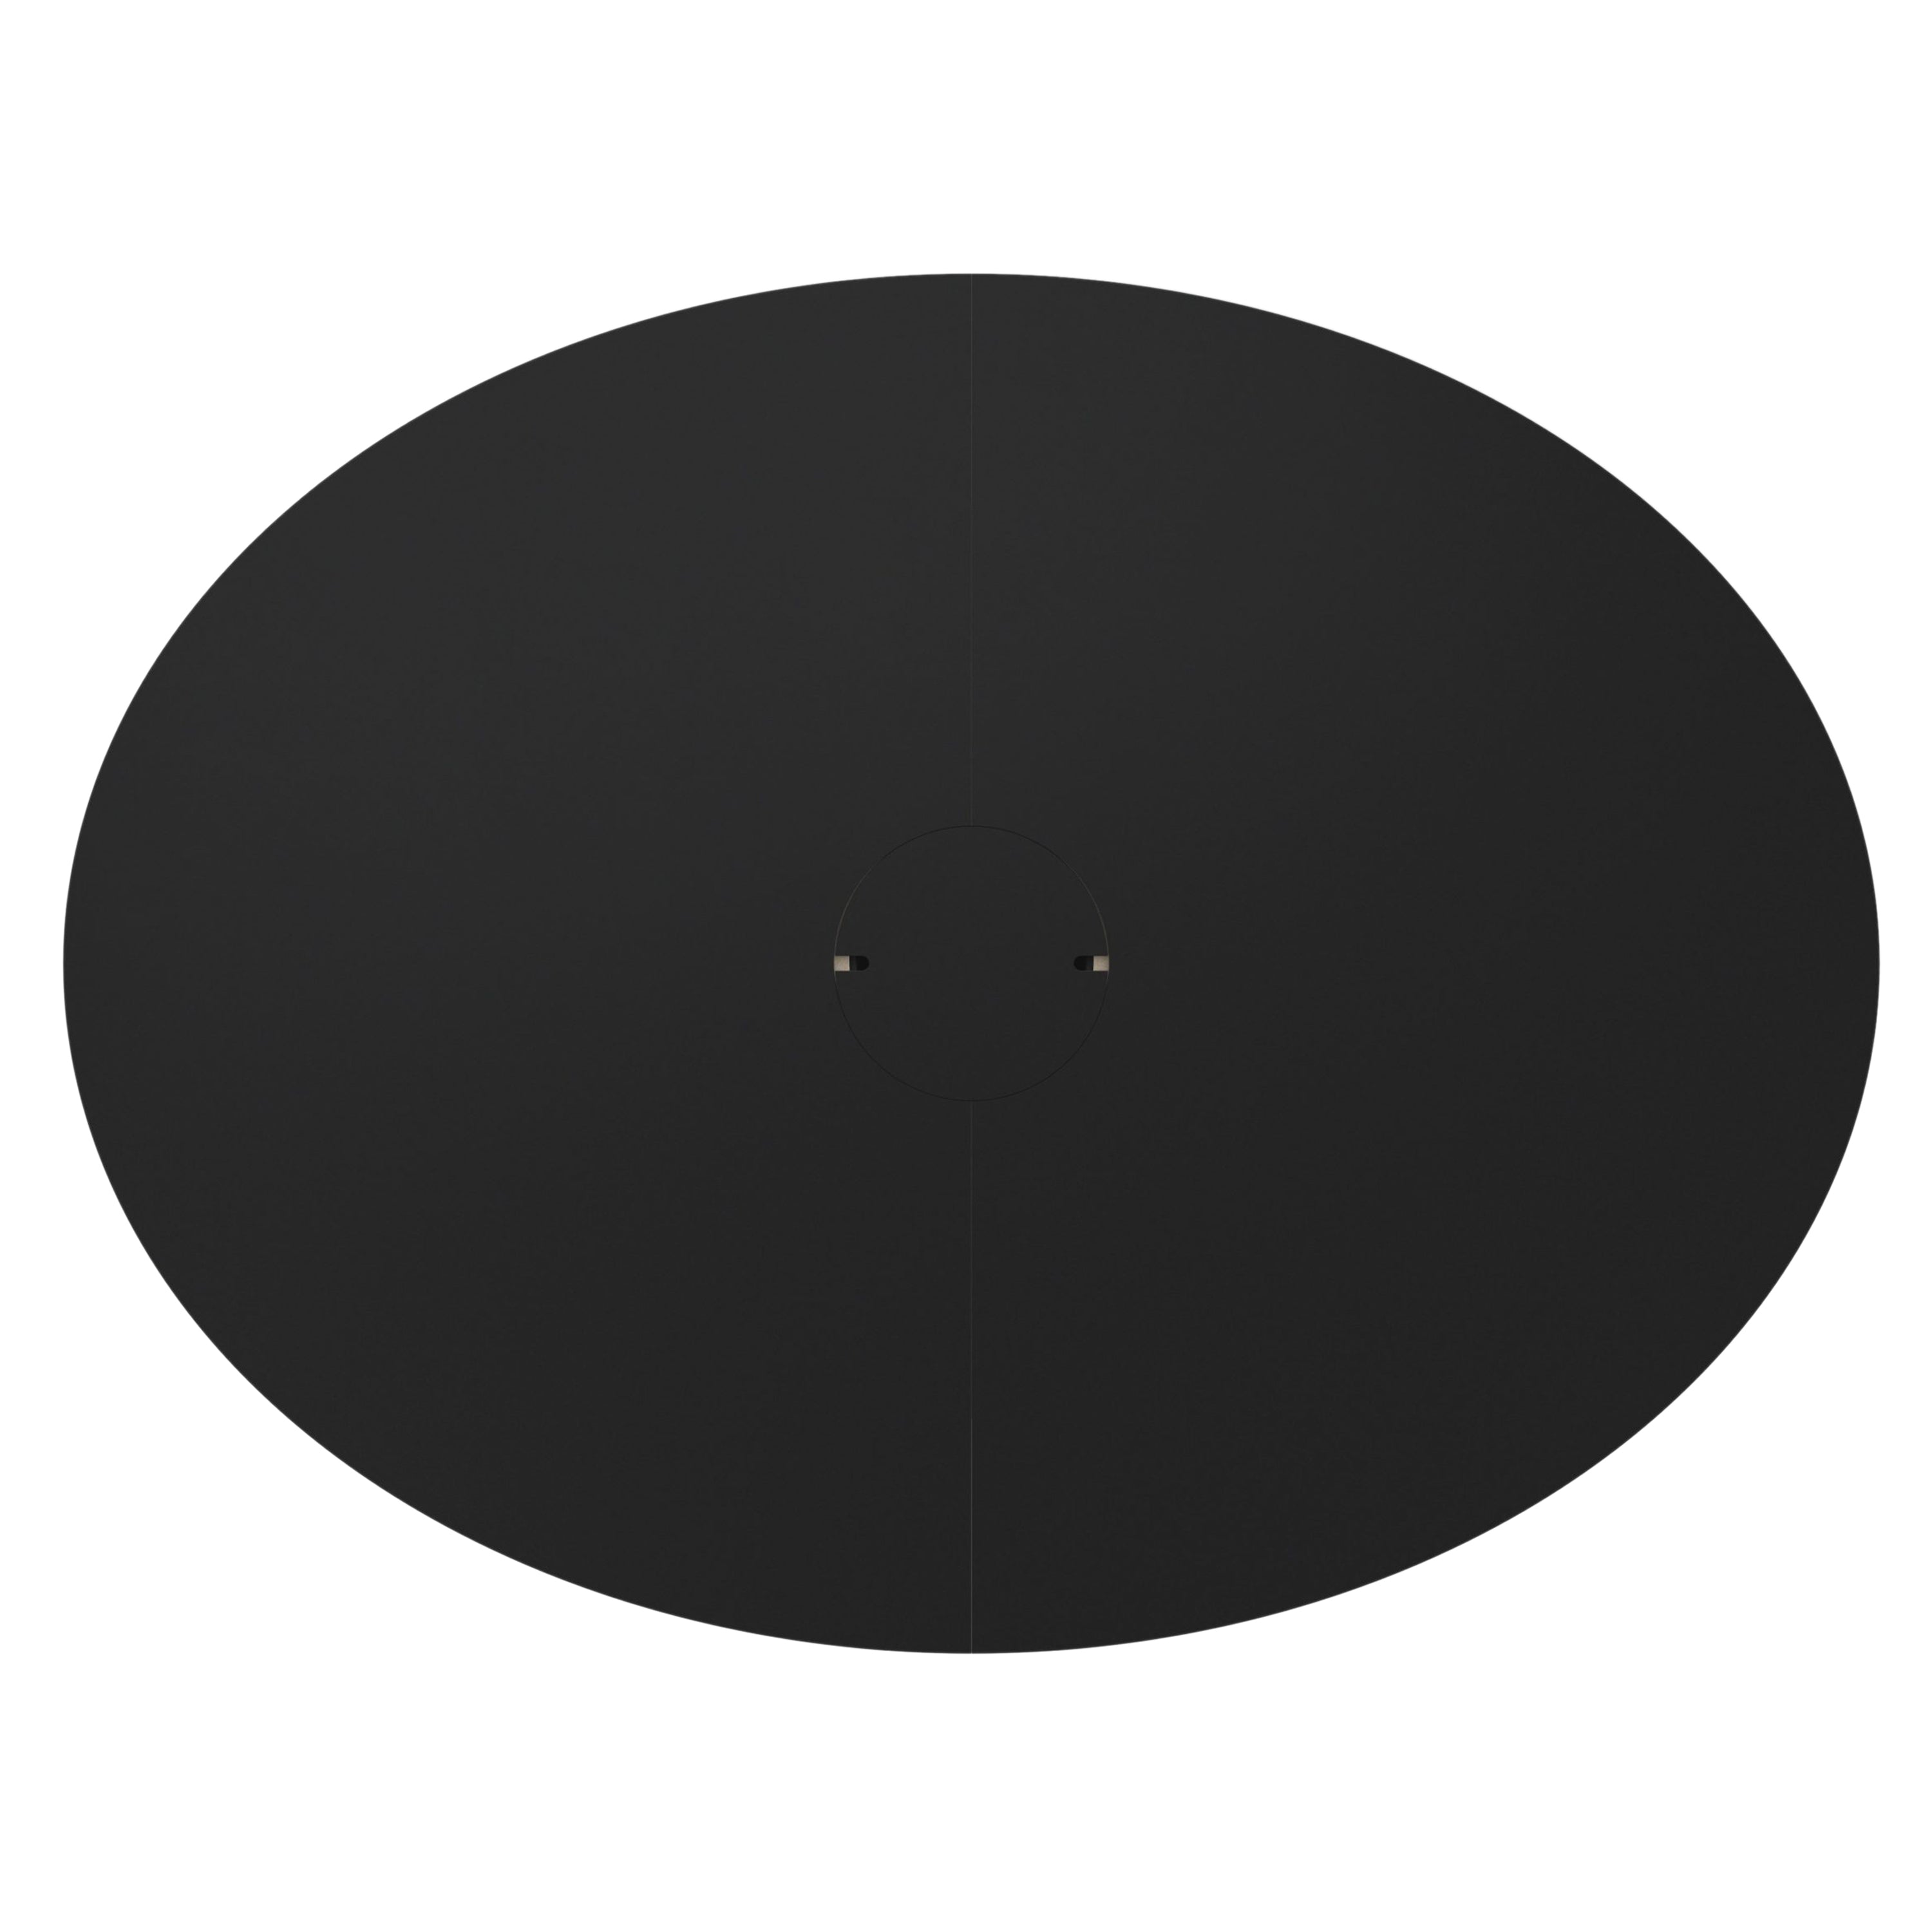 Colossus Oval Table: Black